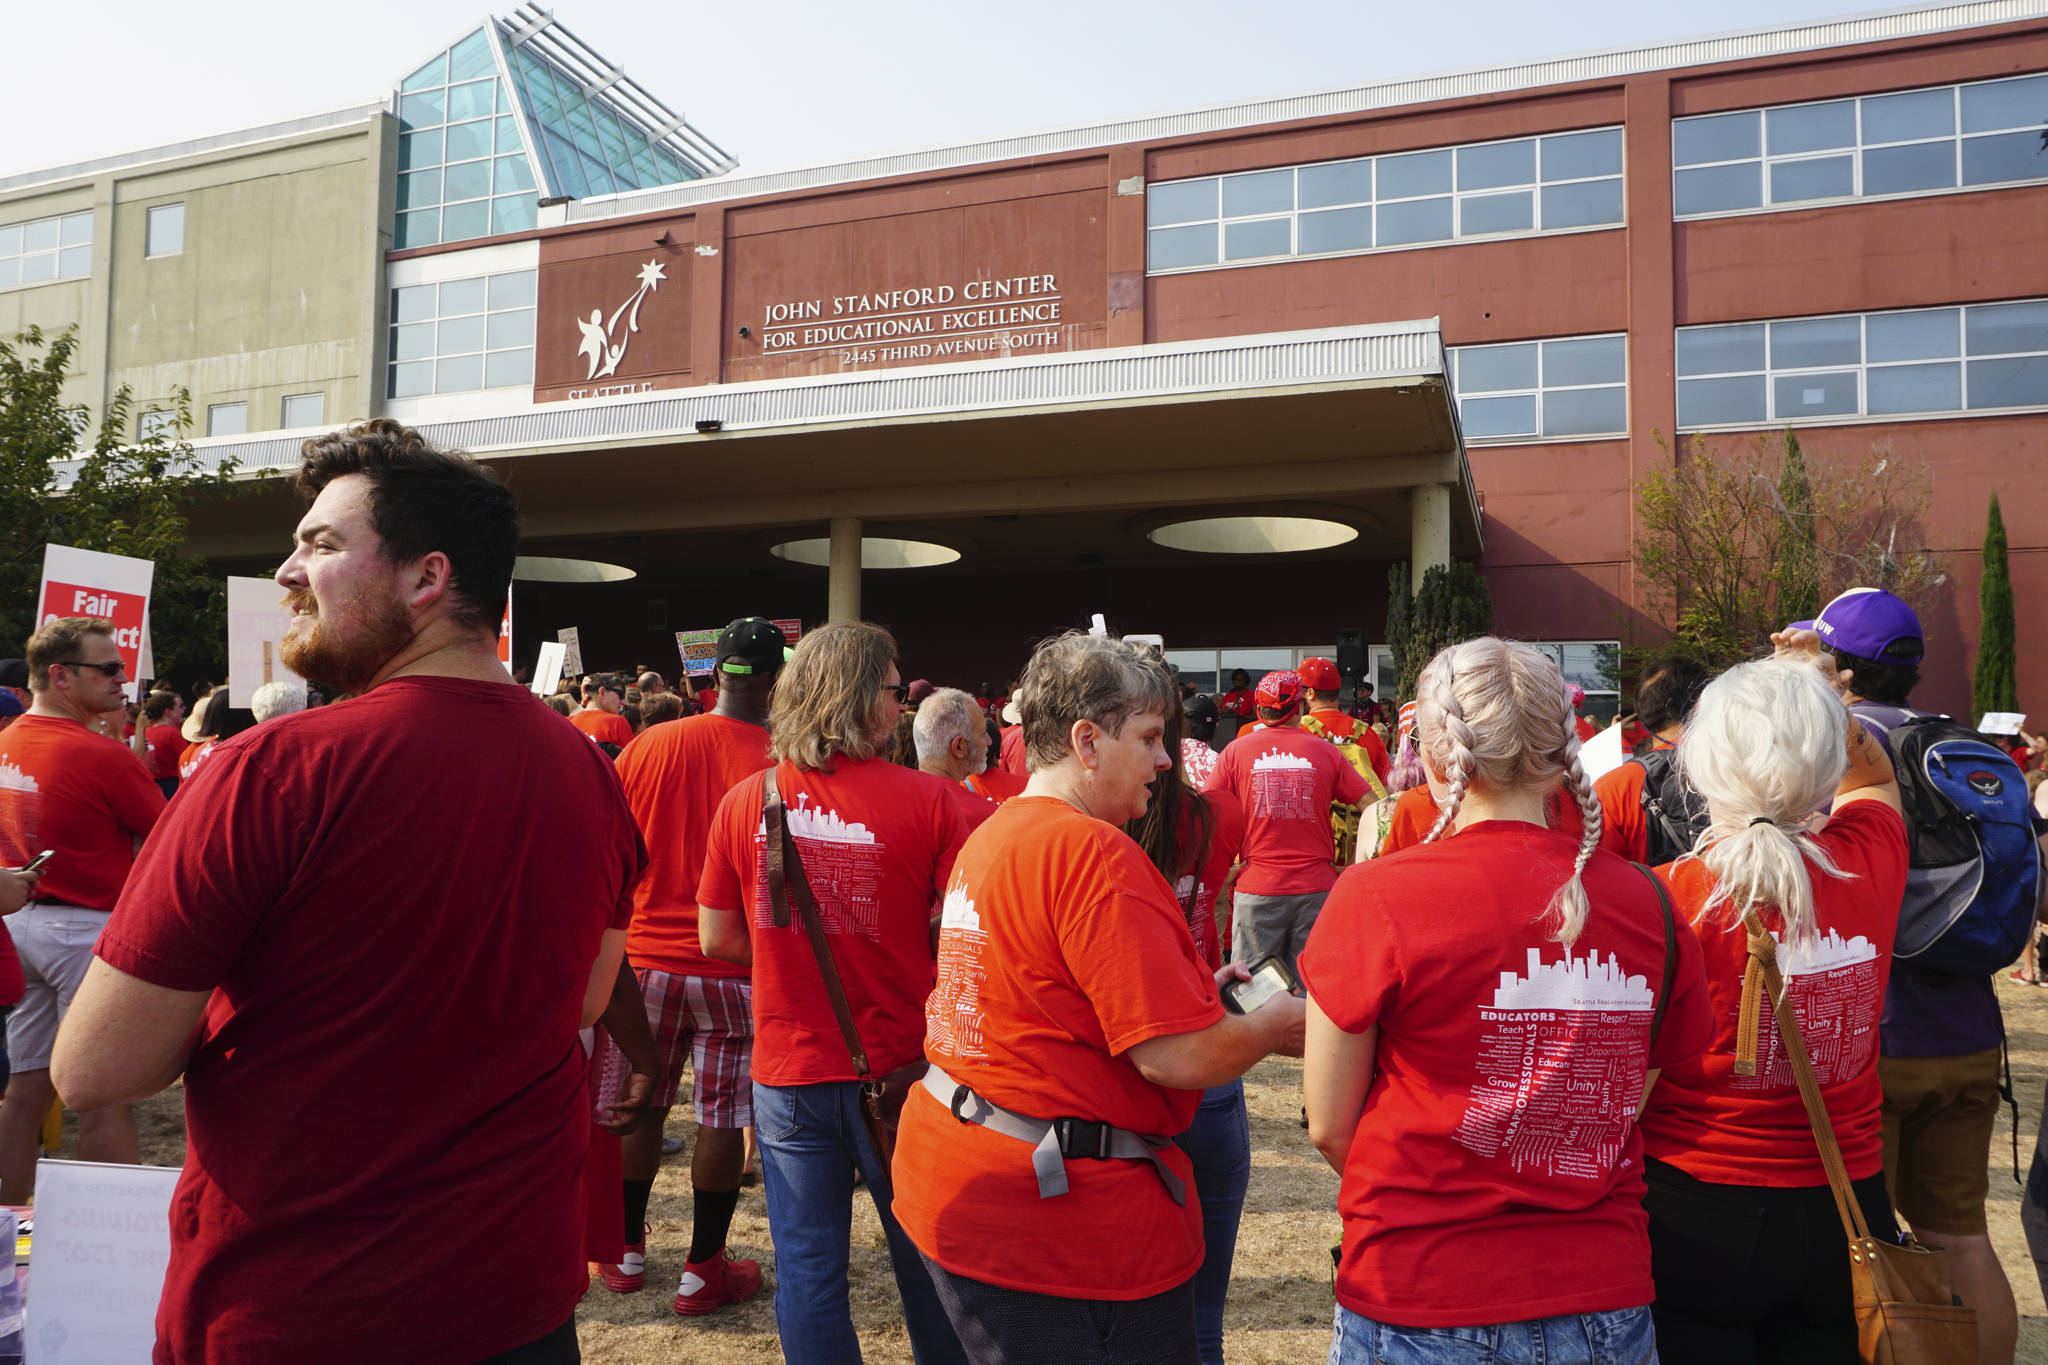 Hundreds of teachers rally outside of John Stanford Center for Educational Excellence to ask for raises in the upcoming contract with Seattle Public Schools. Photo by Melissa Hellmann